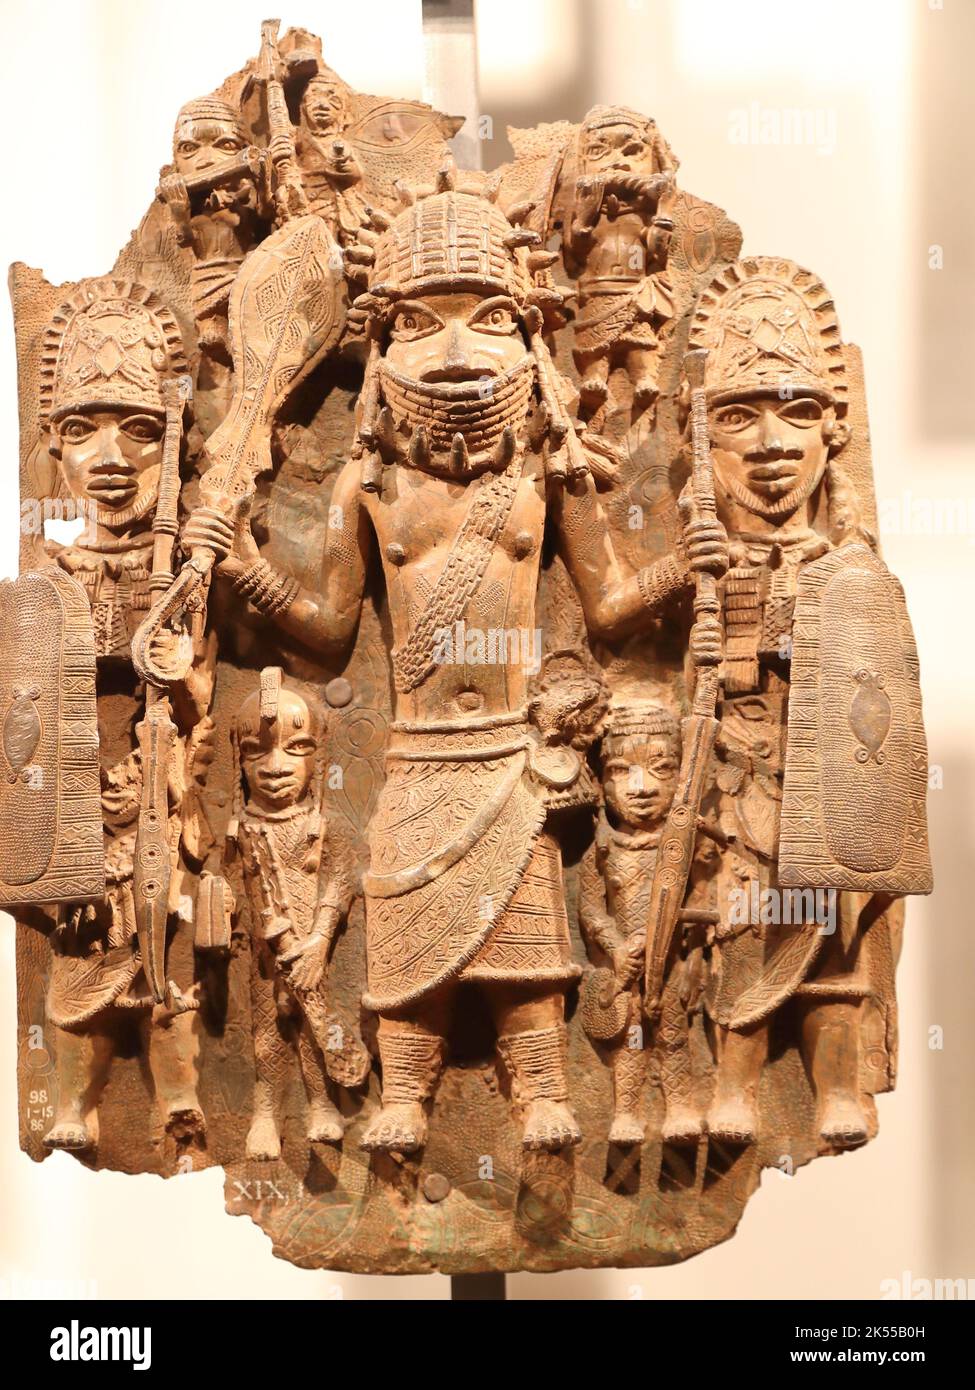 Benin Bronzes on display at the British Museum, brass plaques from the royal court palace of the Kingdom of Benin, 16-17th century, London, UK Stock Photo